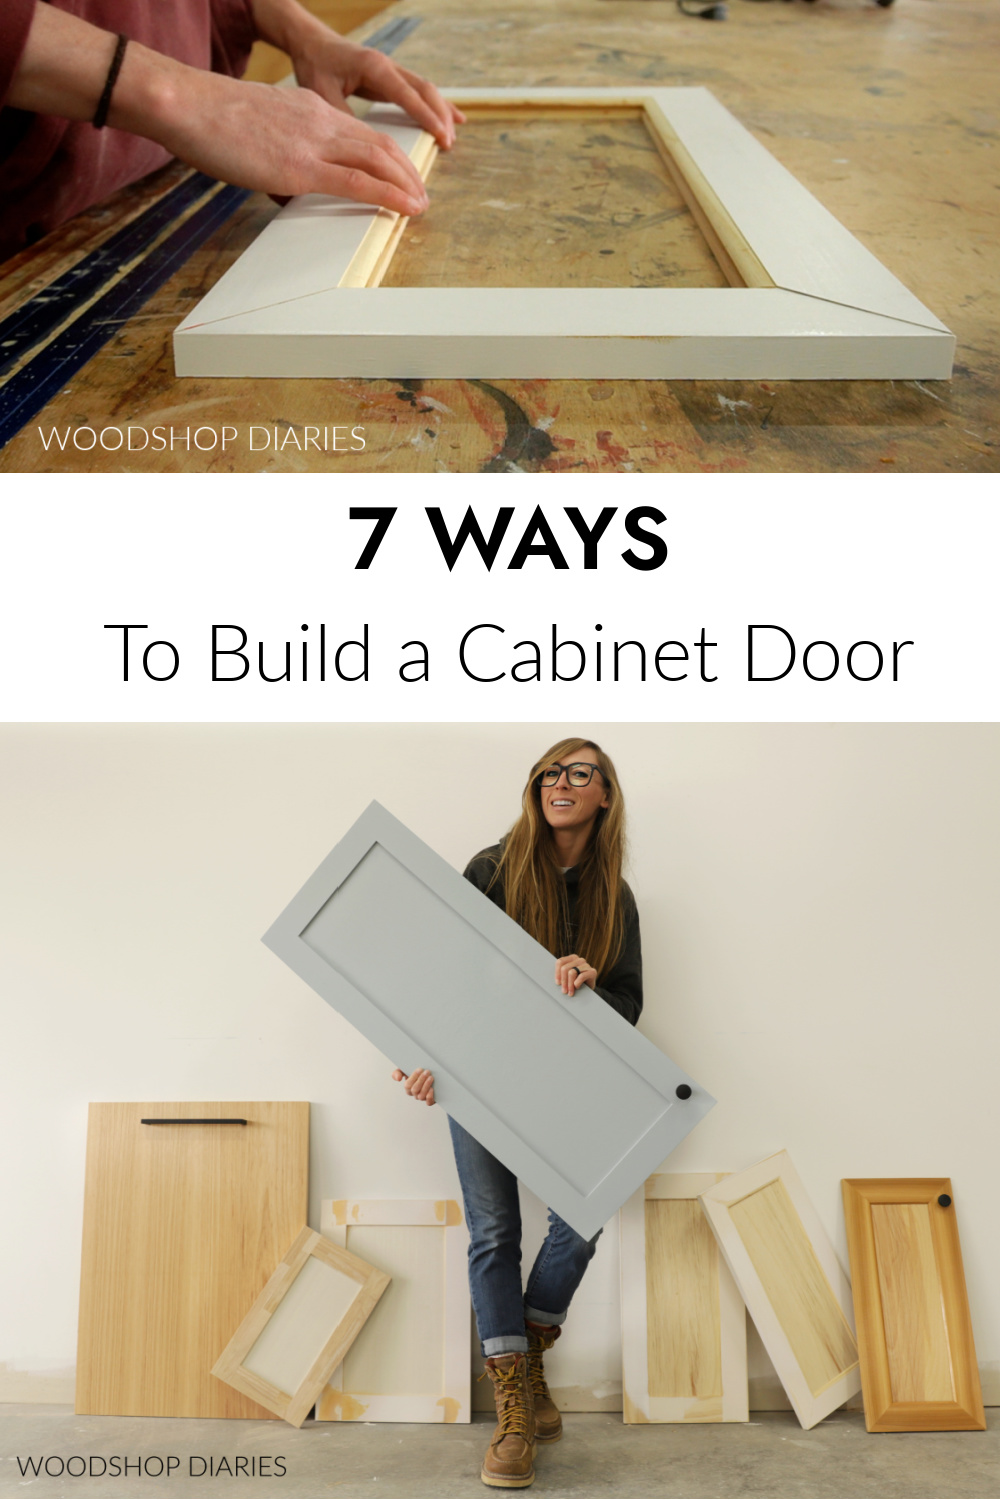 Pinterest collage image showing cabinet door frame pieces fit together at top and Shara Woodshop Diaries with 7 cabinet doors at bottom with text "7 ways to build a cabinet door"